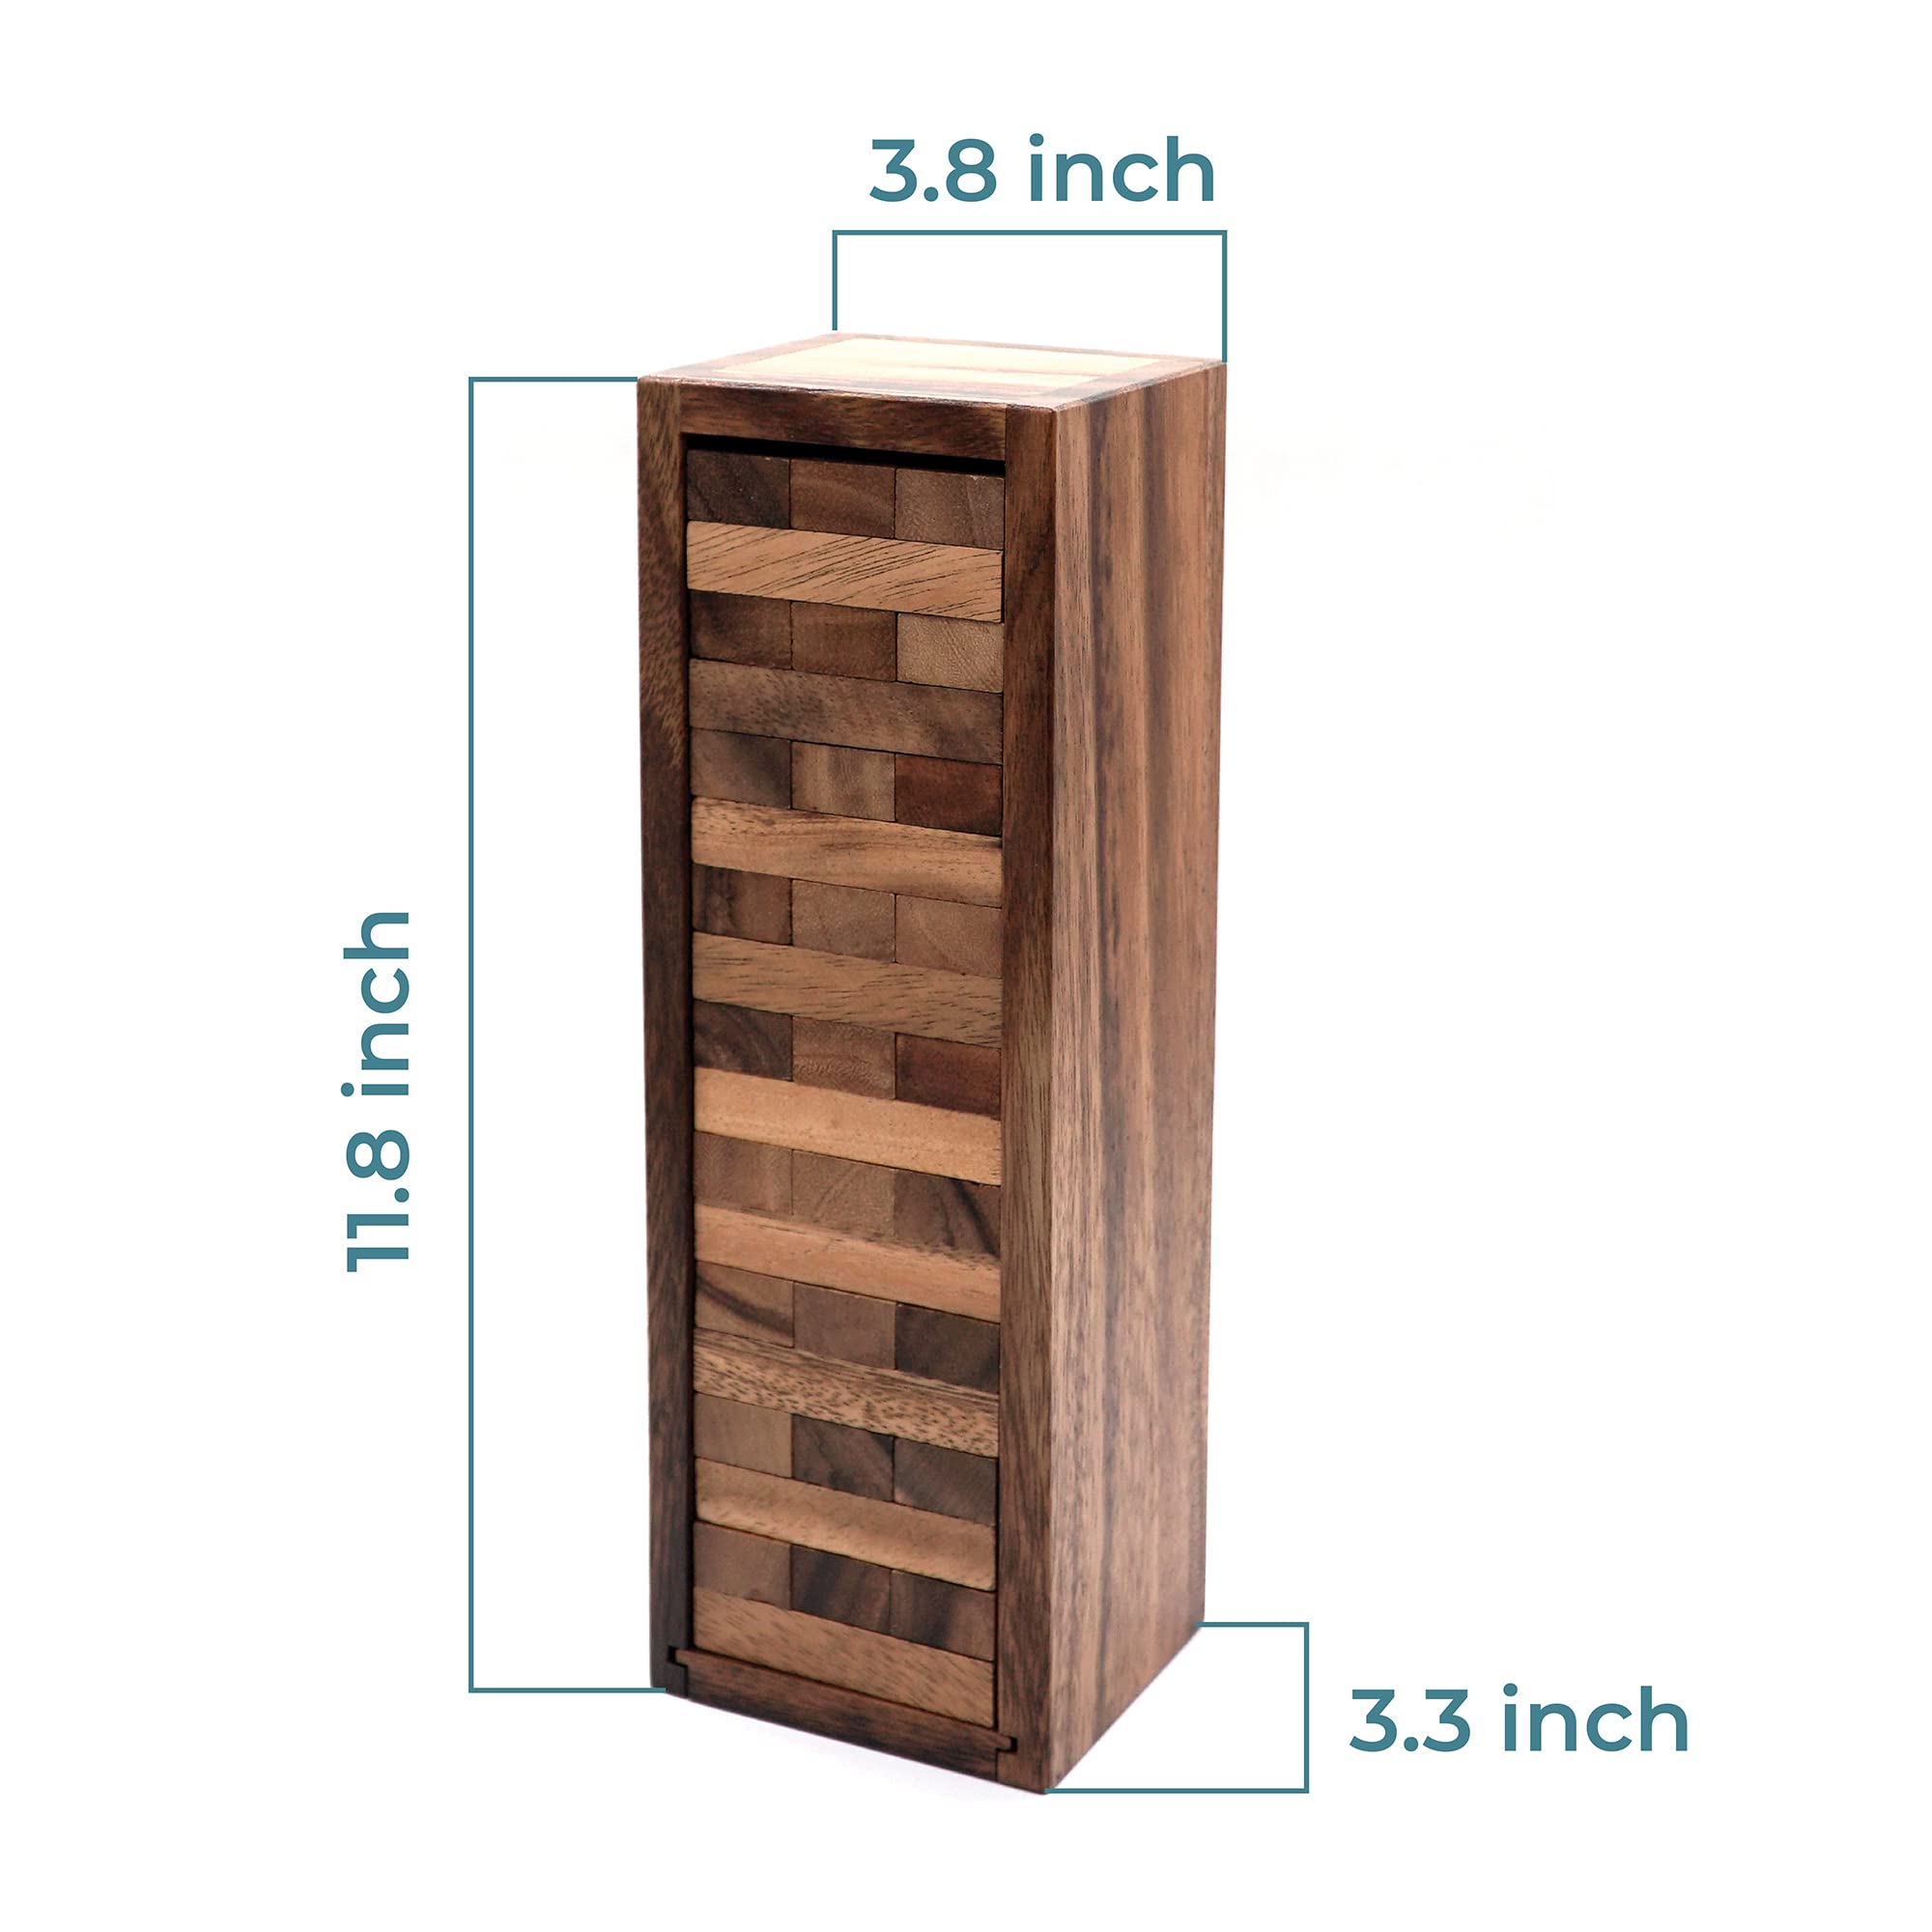 BSIRI Wood Tumbling Tower Game - Ideal for Party Games, Camping Games, Outdoor Games for Adults and Family, Classic Stacking Block Games for Challenging Your Skills